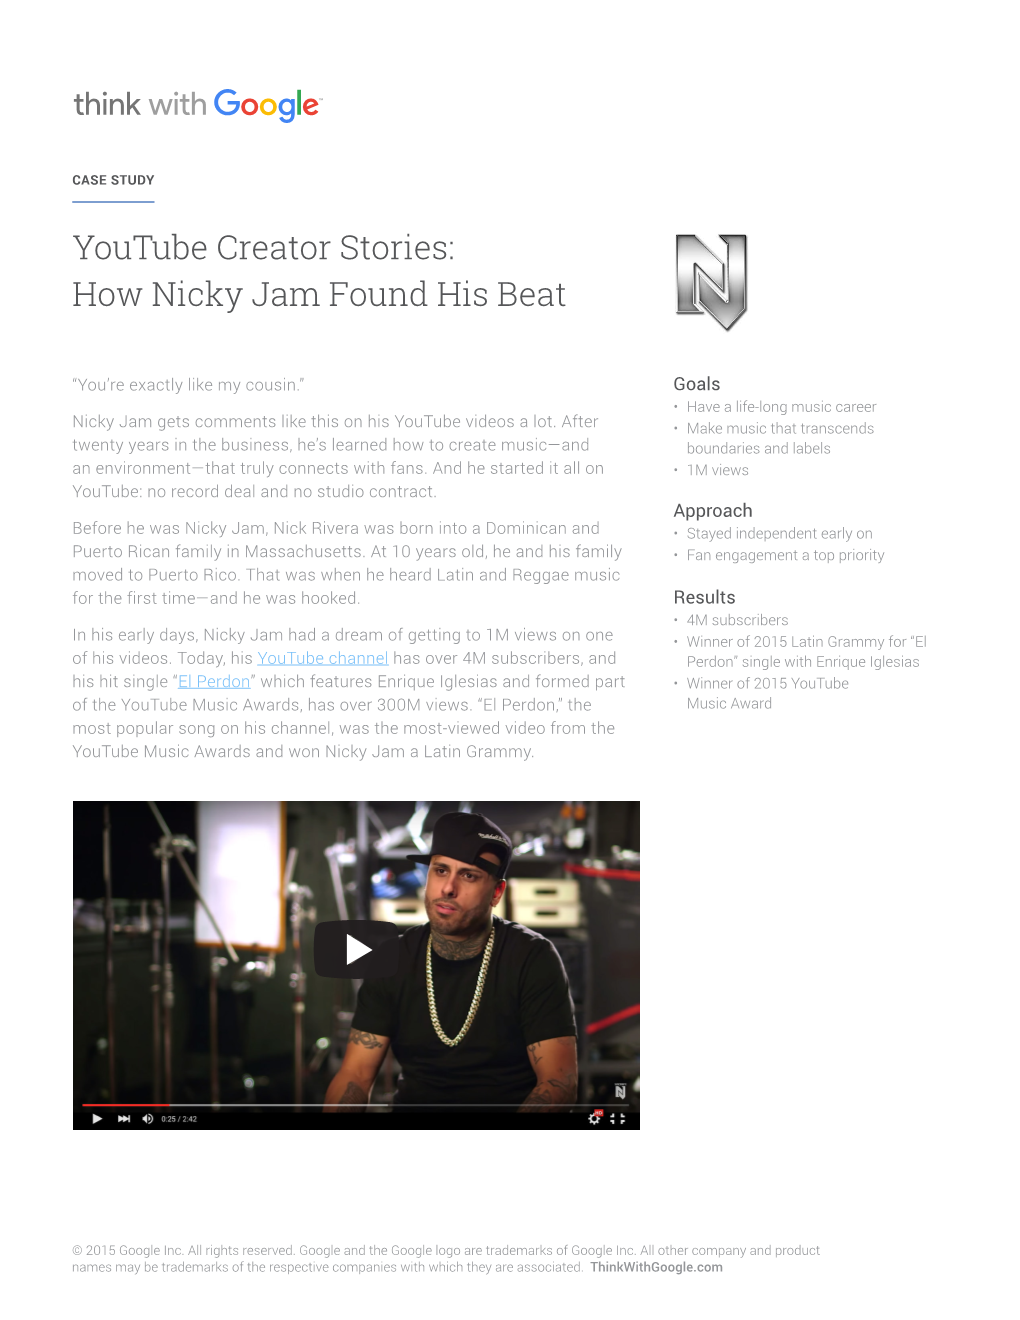 Youtube Creator Stories: How Nicky Jam Found His Beat